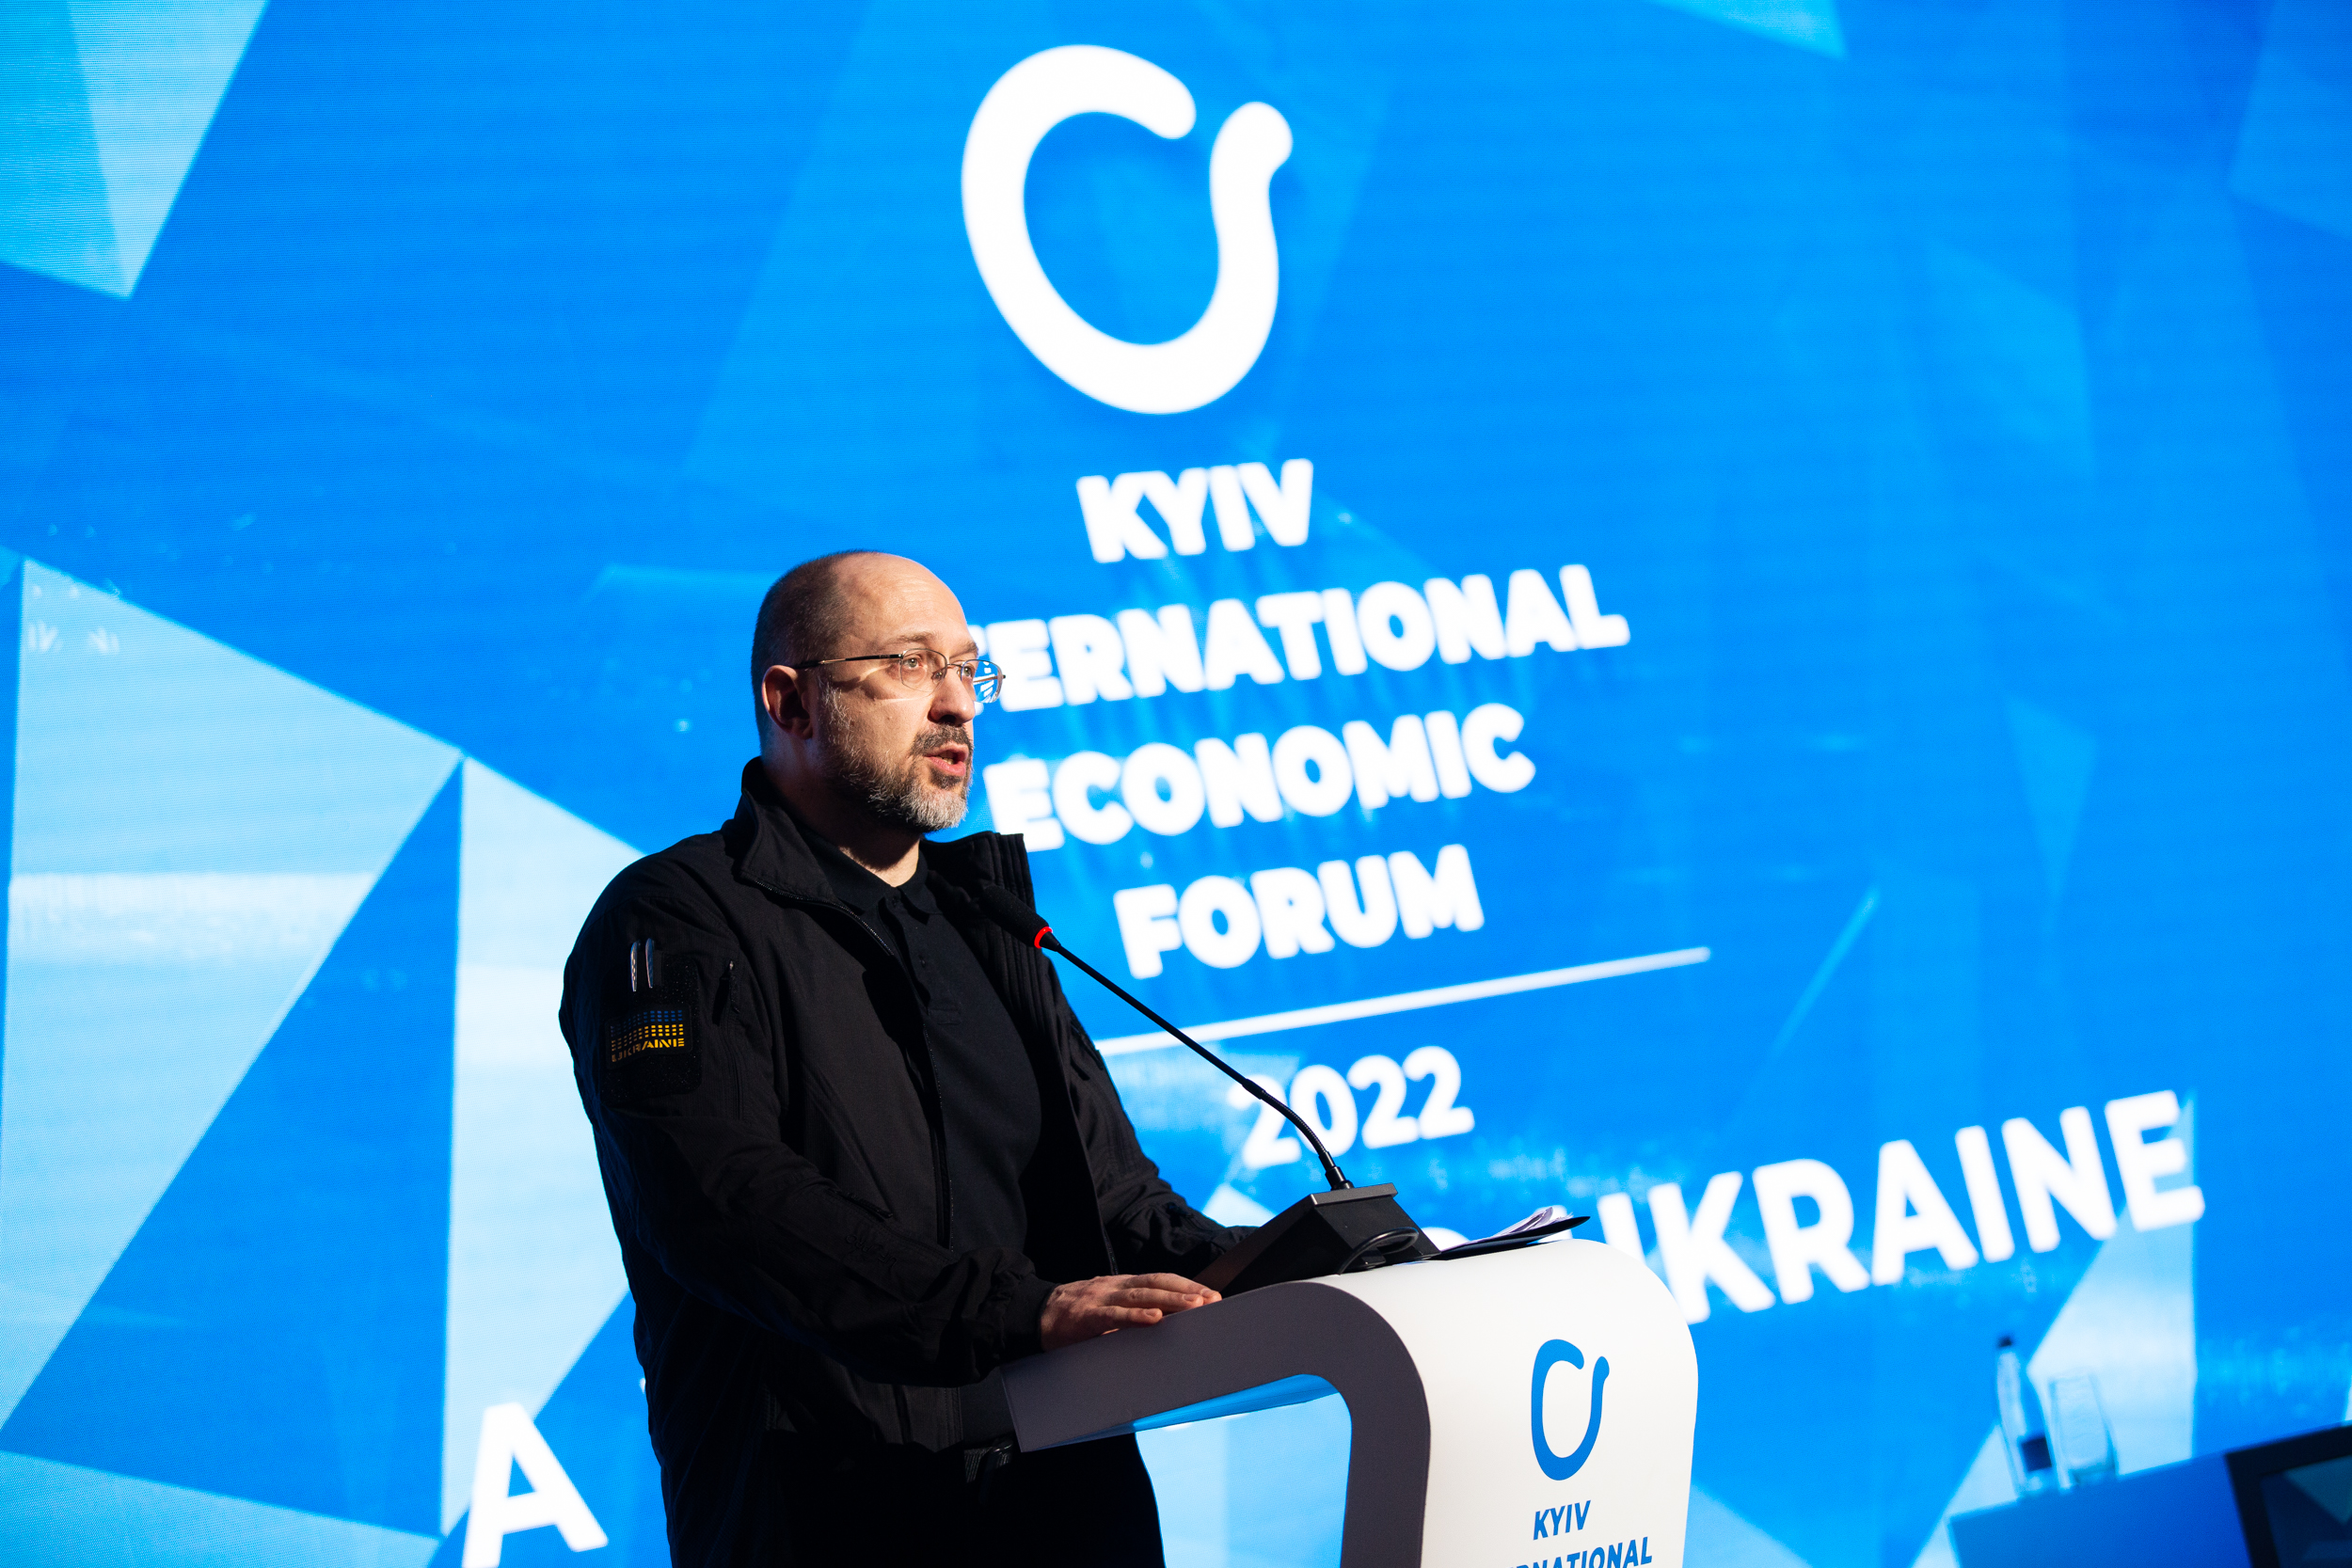  Grand Opening. Dialogue with the Prime Minister of Ukraine KIEF 2022